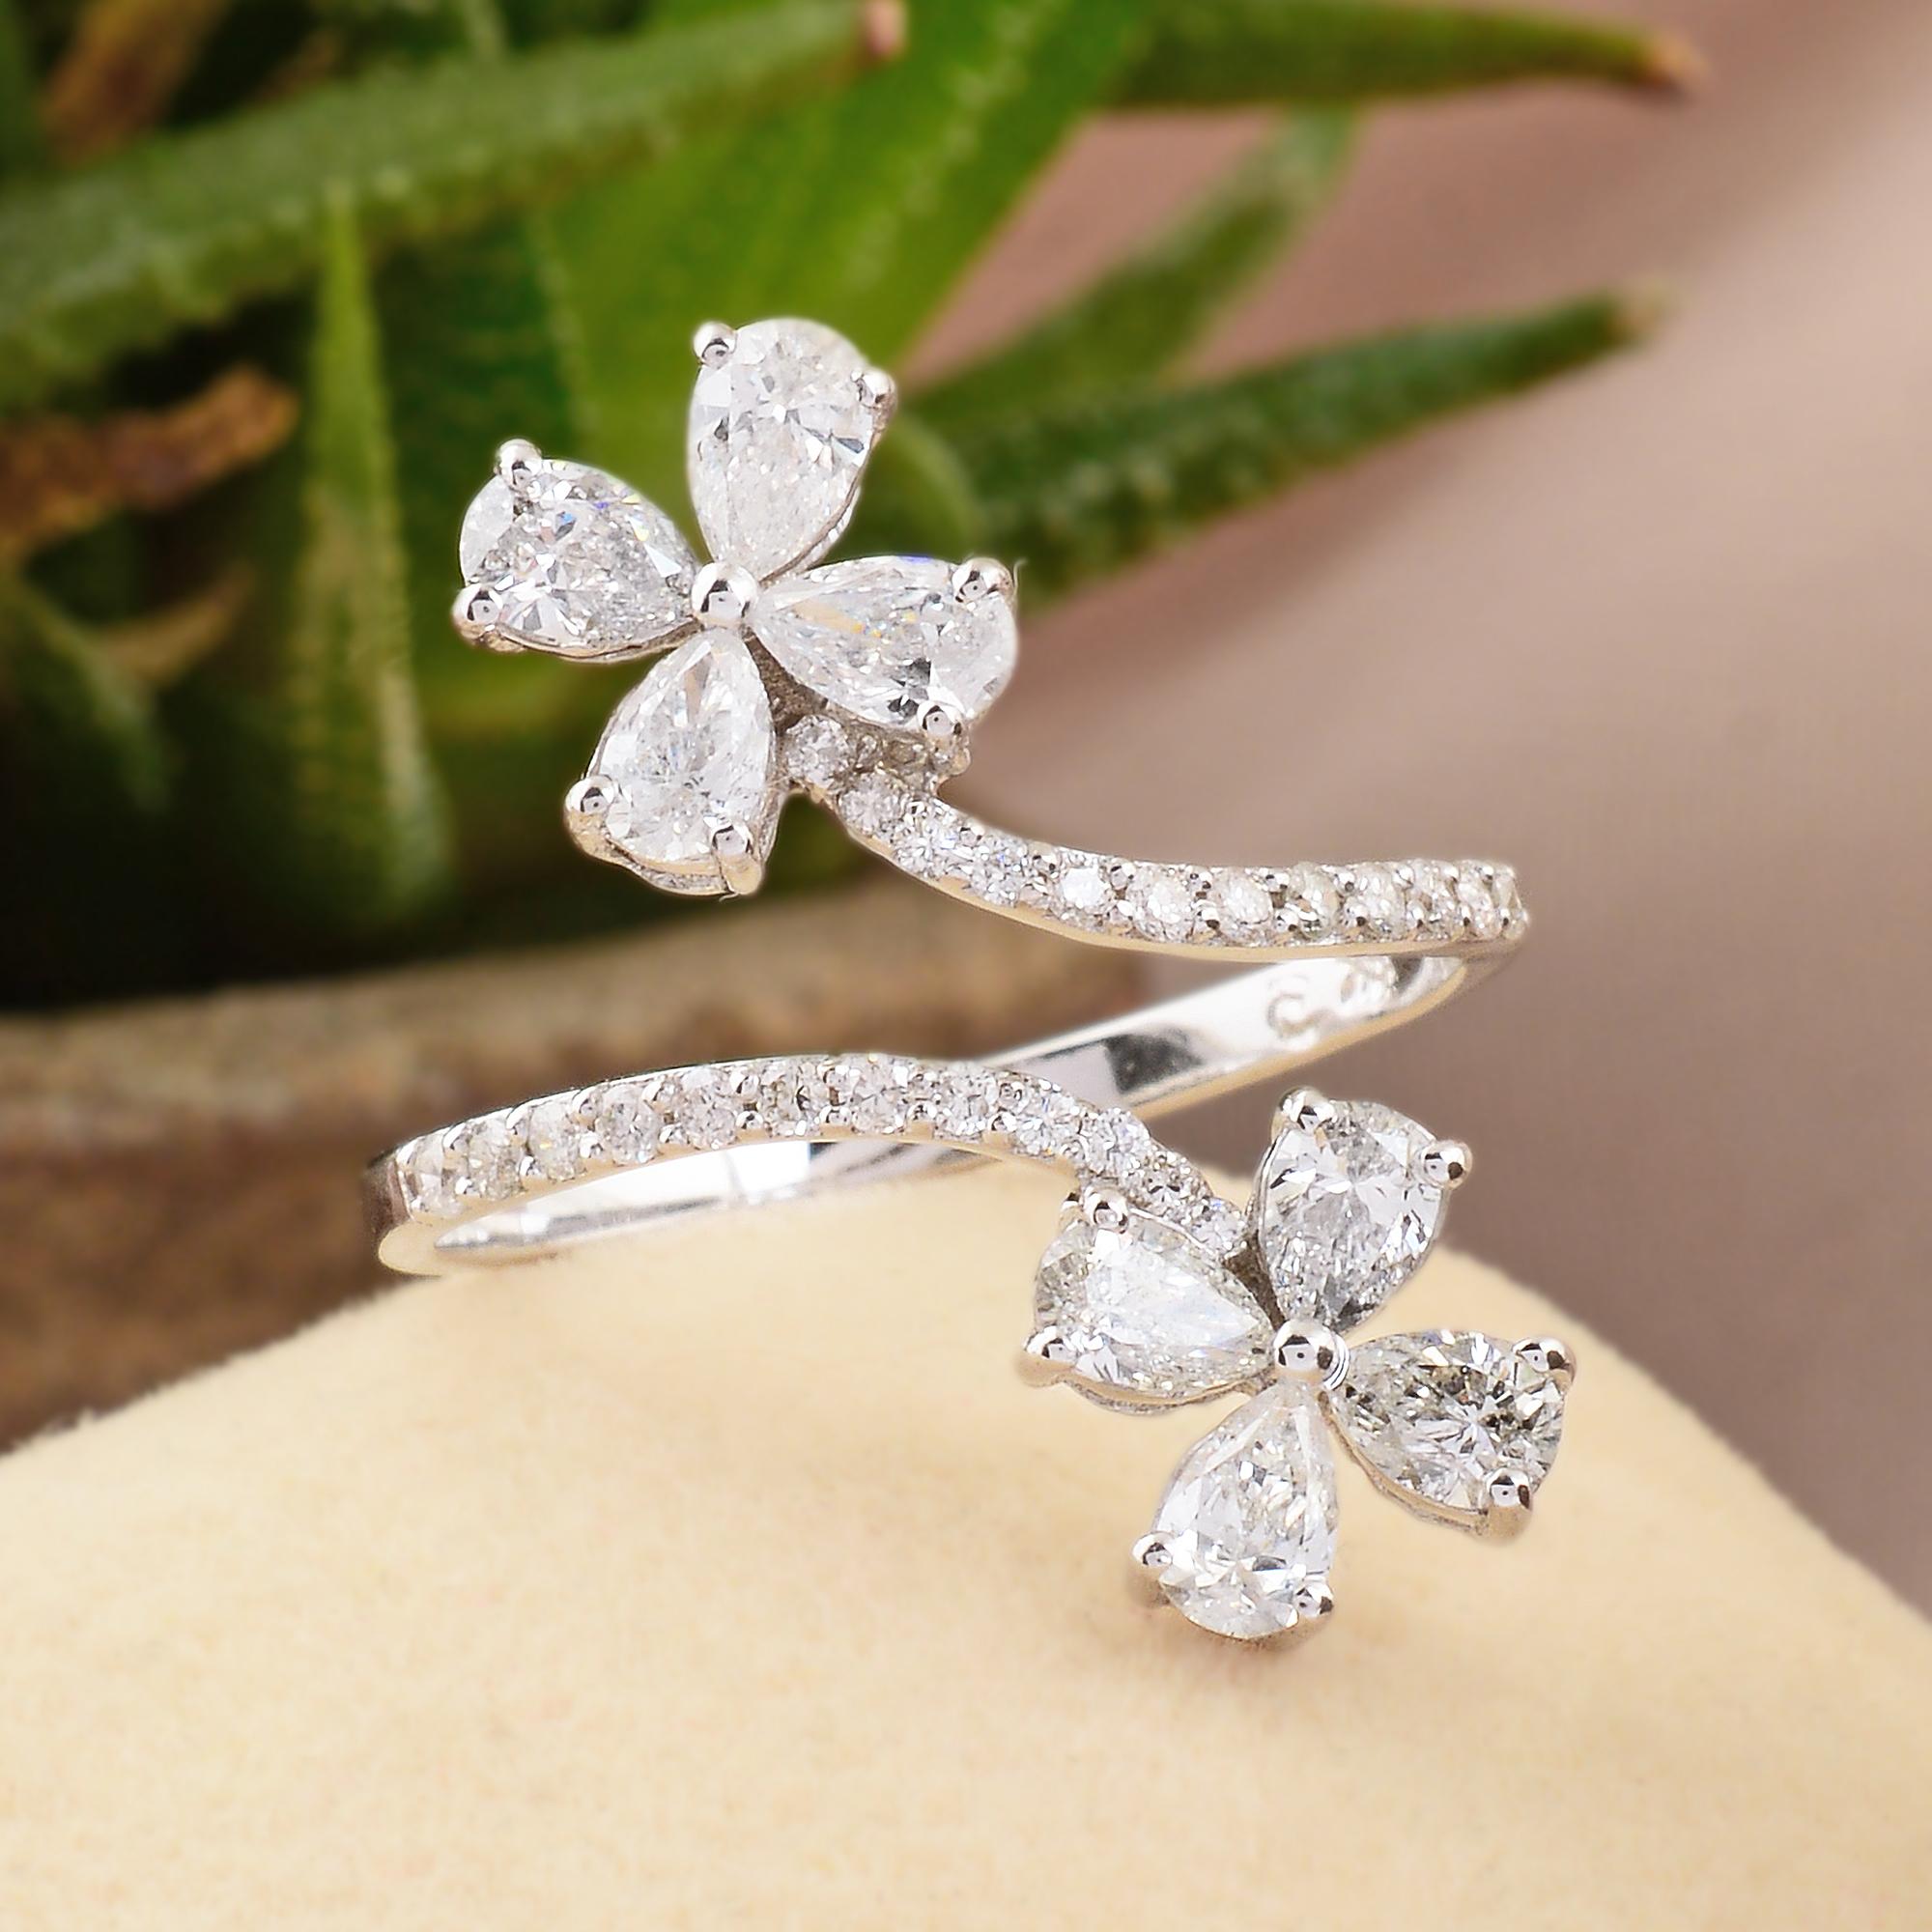 For Sale:  SI Clarity HI Color Pear Diamond Double Flower Wrap Ring 14k White Gold Jewelry 3